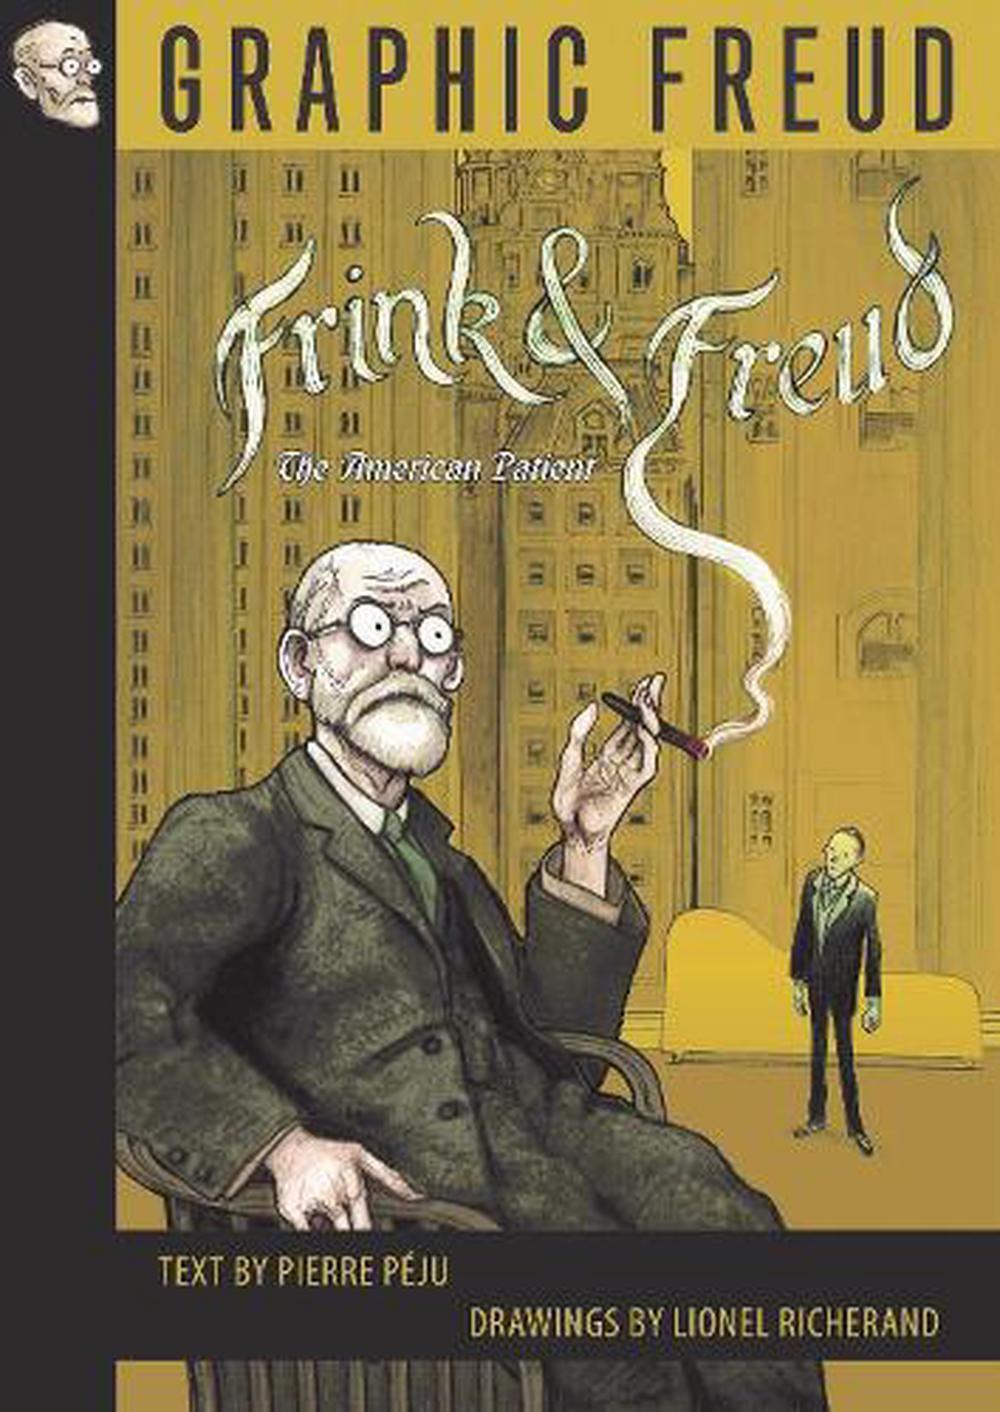 Frink and Freud by Pierre P?ju (English) Paperback Book